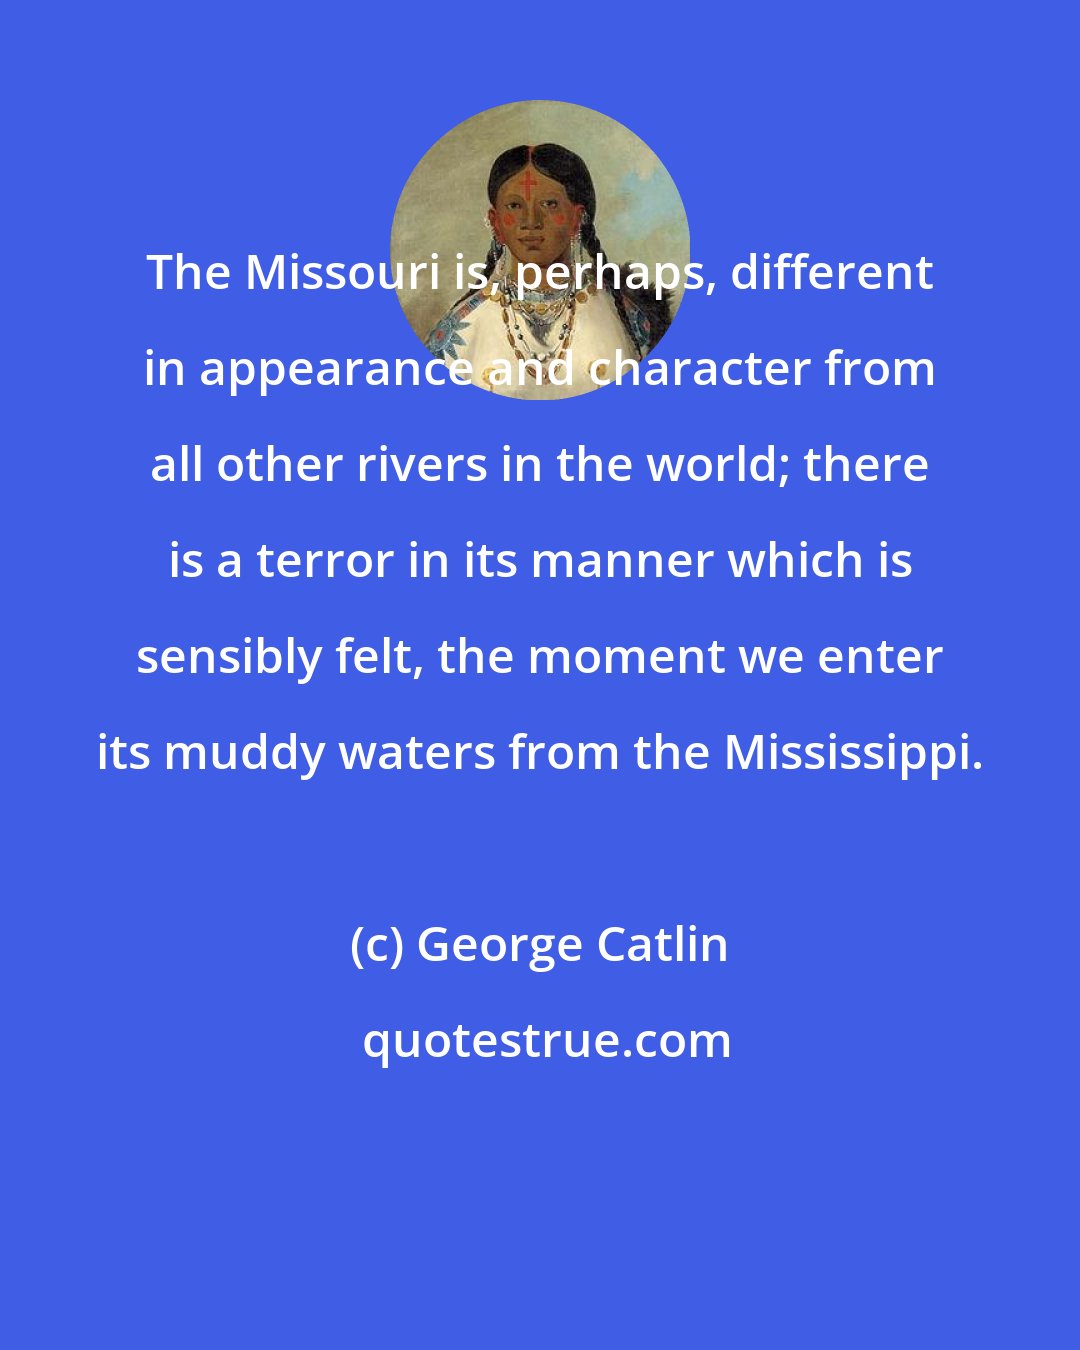 George Catlin: The Missouri is, perhaps, different in appearance and character from all other rivers in the world; there is a terror in its manner which is sensibly felt, the moment we enter its muddy waters from the Mississippi.